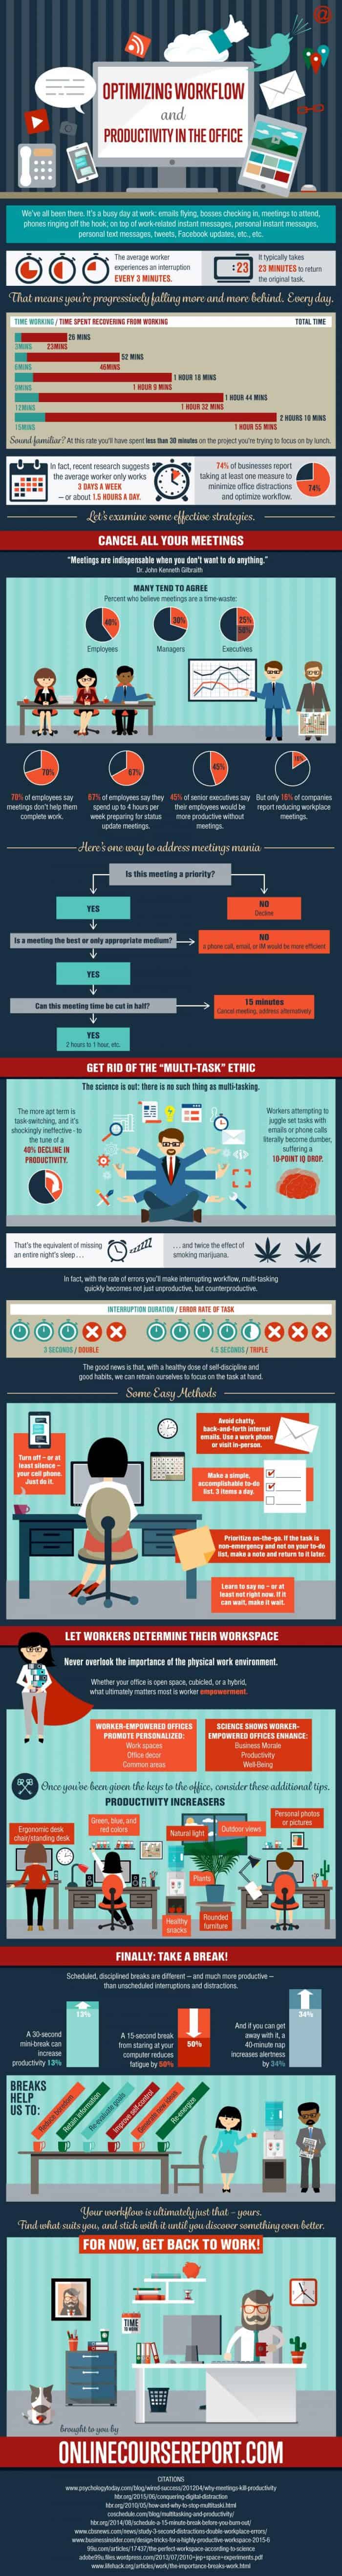 Optimizing Workflow And Productivity In The Office Infographic